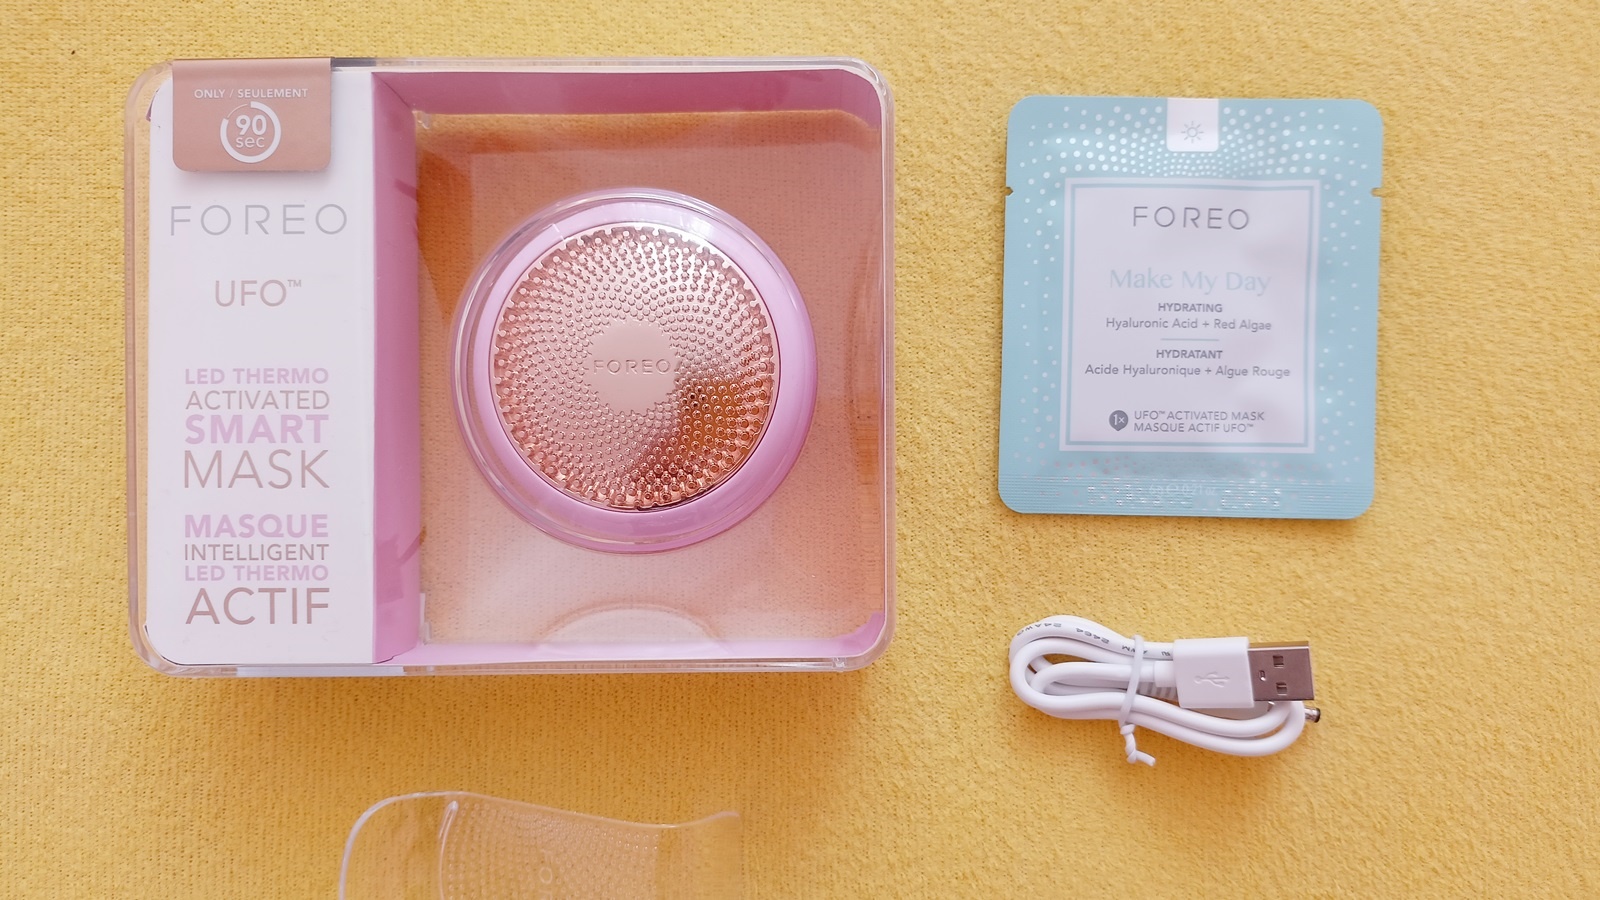 FOREO UFO Review: Sonic device for accelerating the effects of facial masks